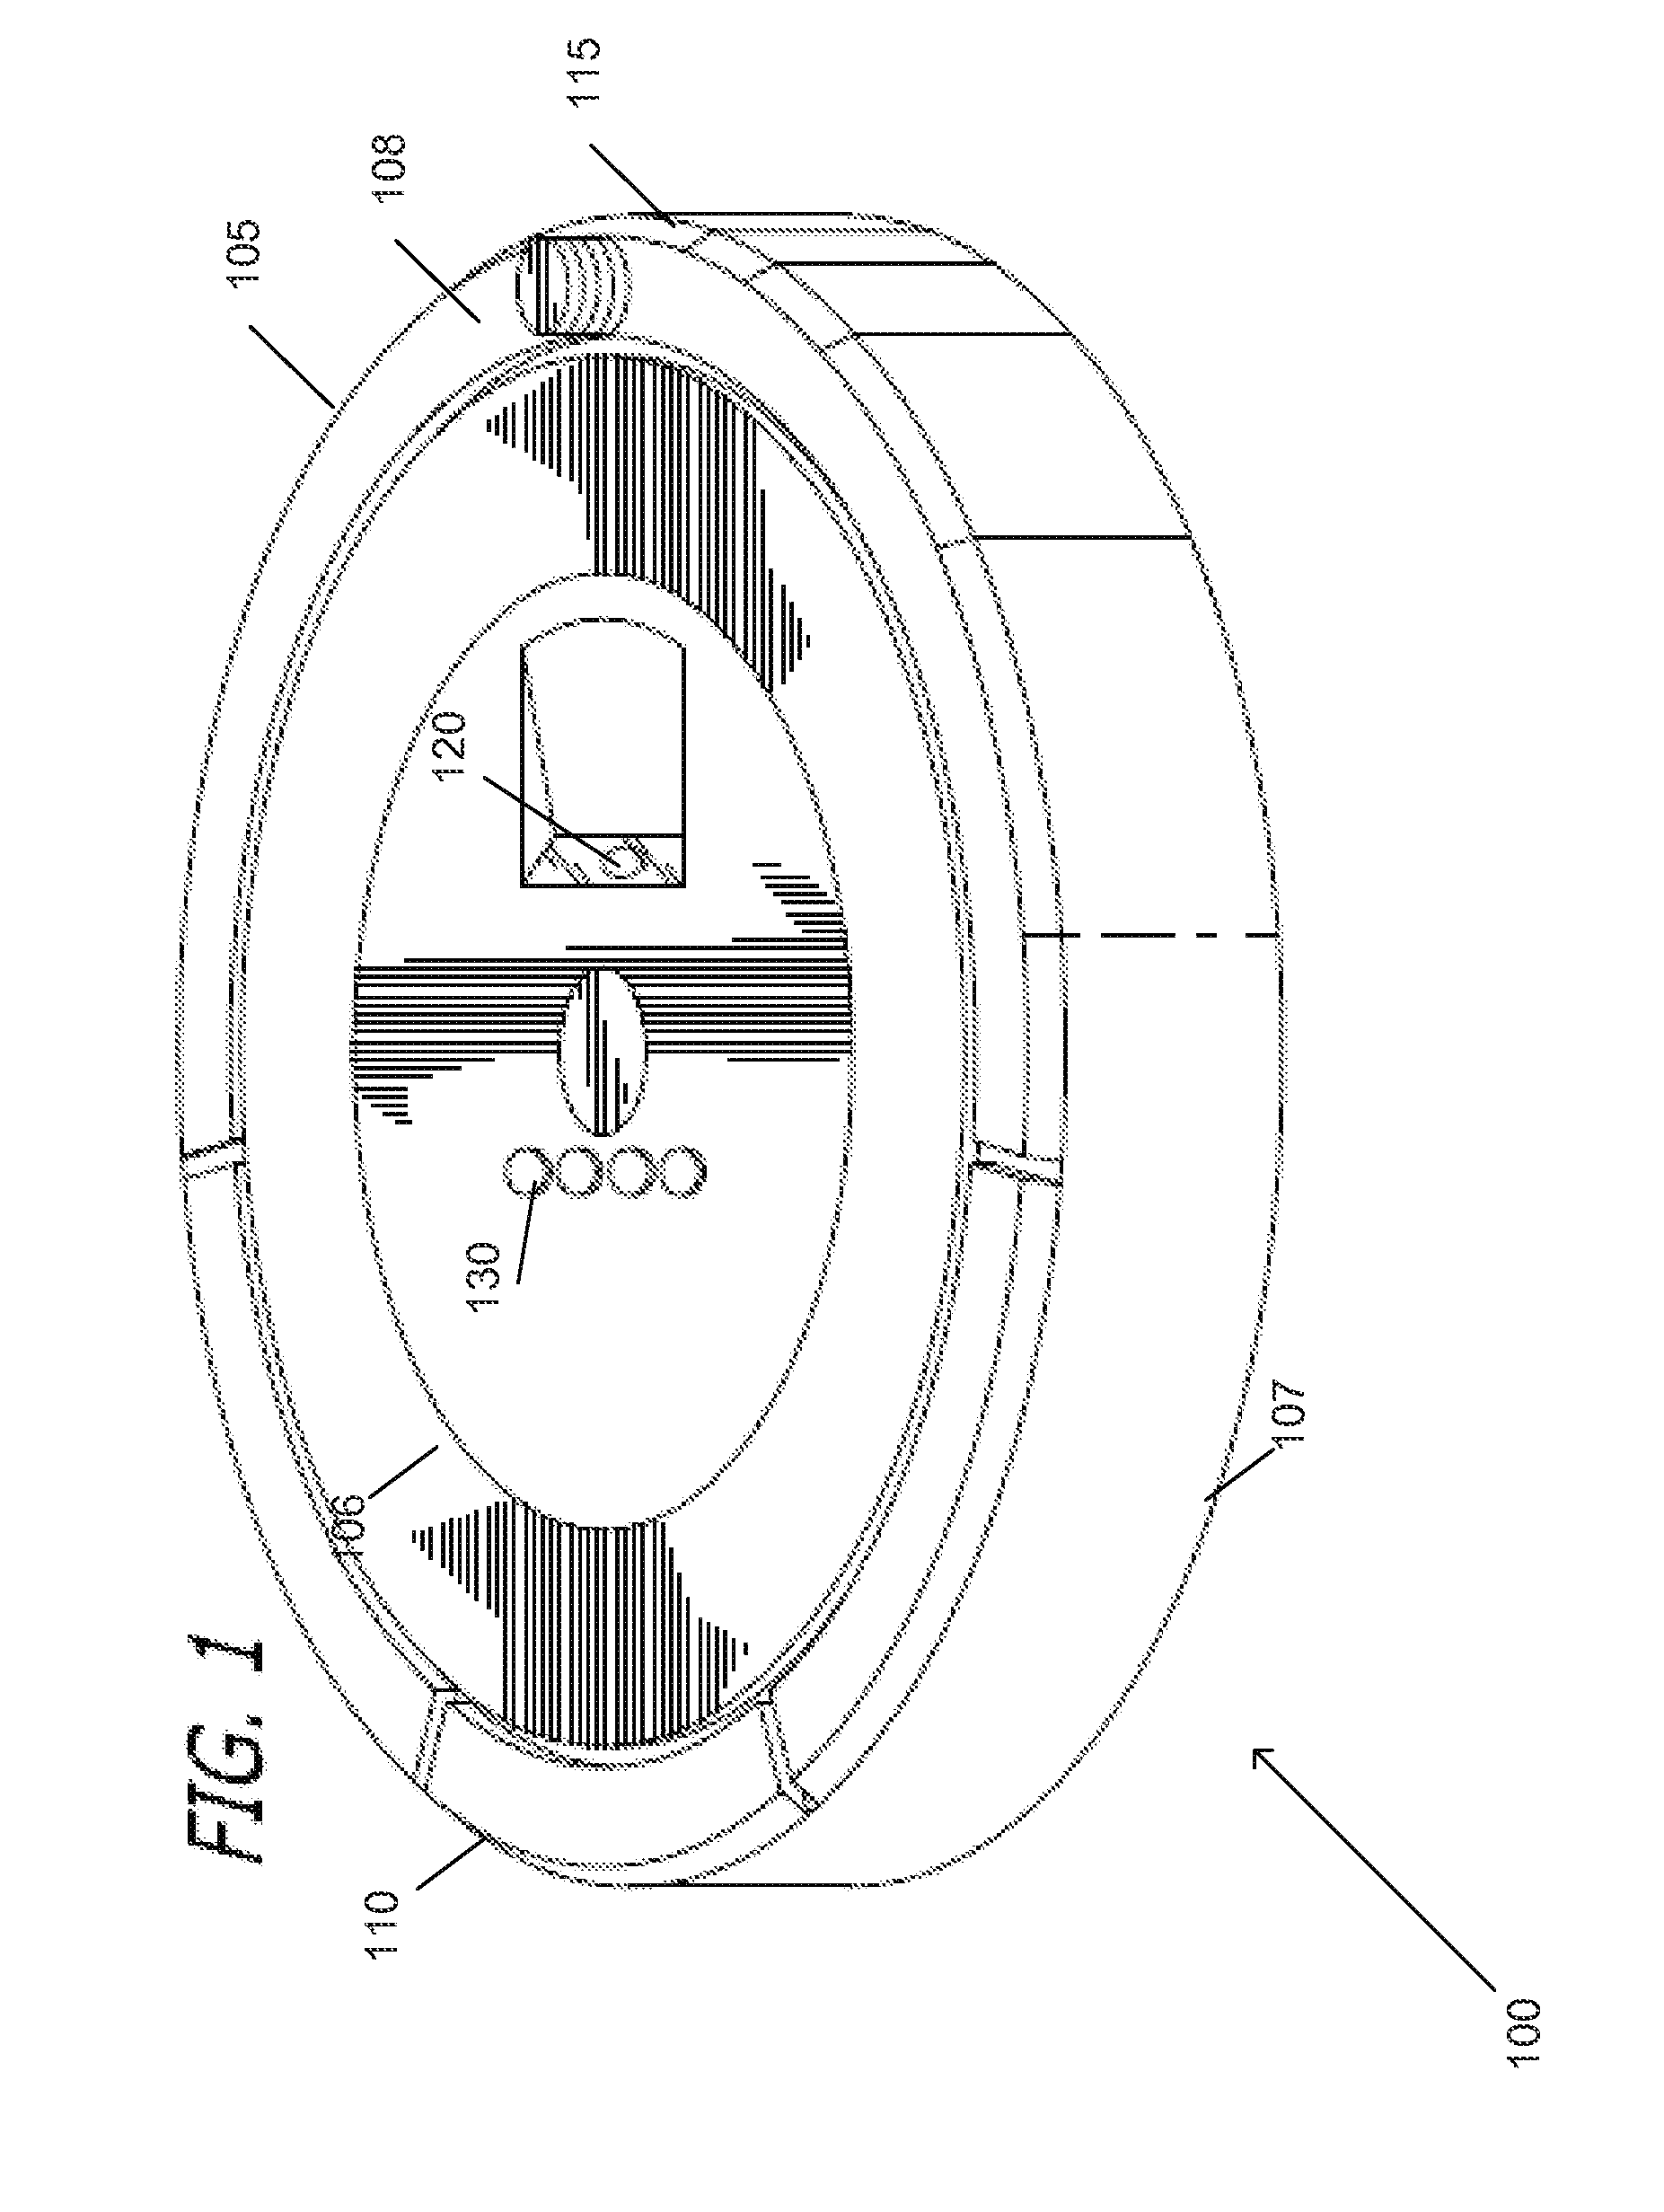 Systems and Methods for Use of Optical Odometry Sensors In a Mobile Robot